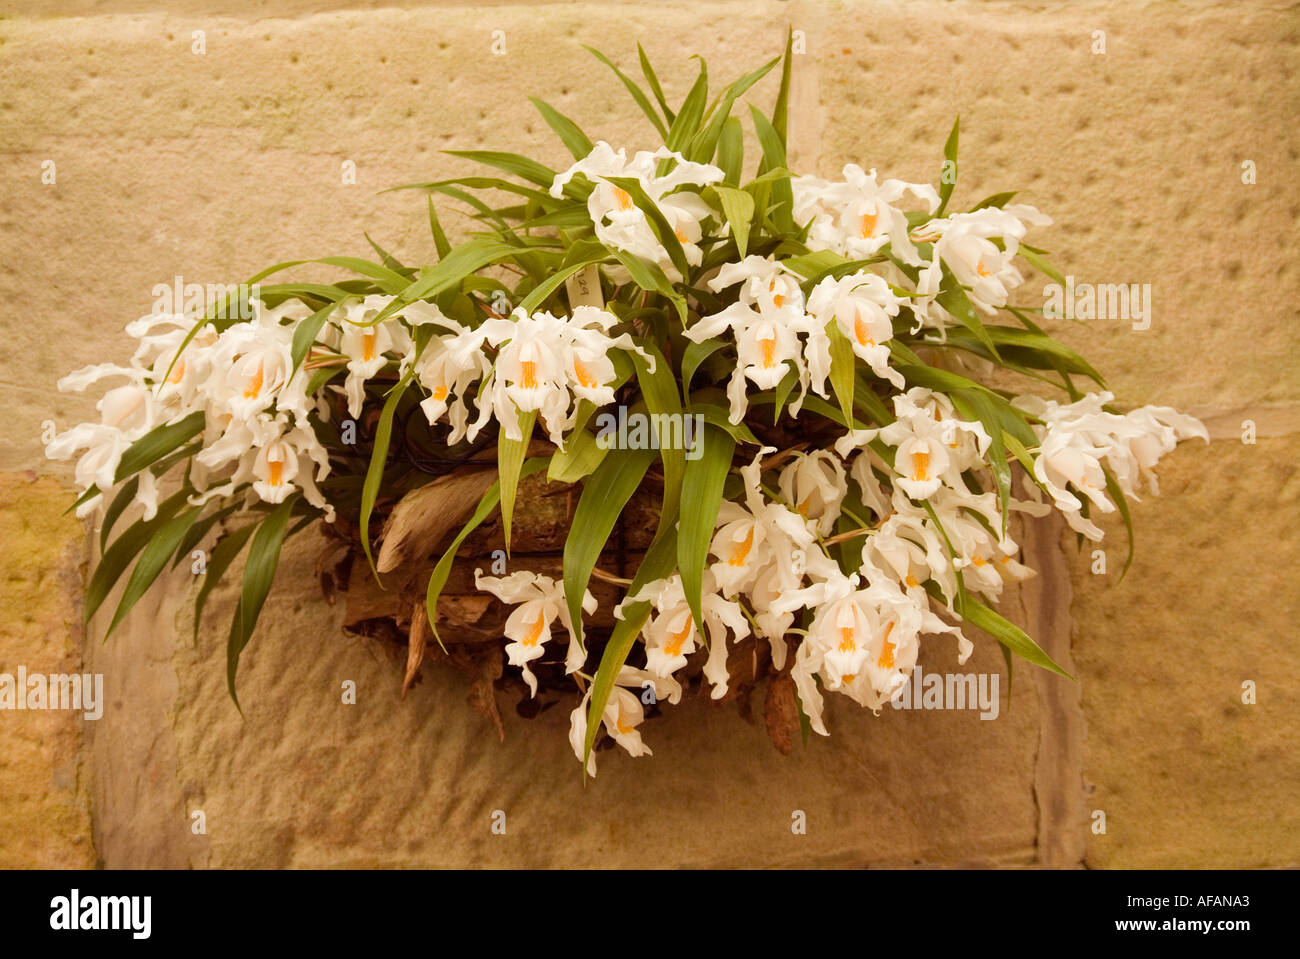 Bridal Veil orchid Coelogyne cristata from the Himalayas Stock Photo